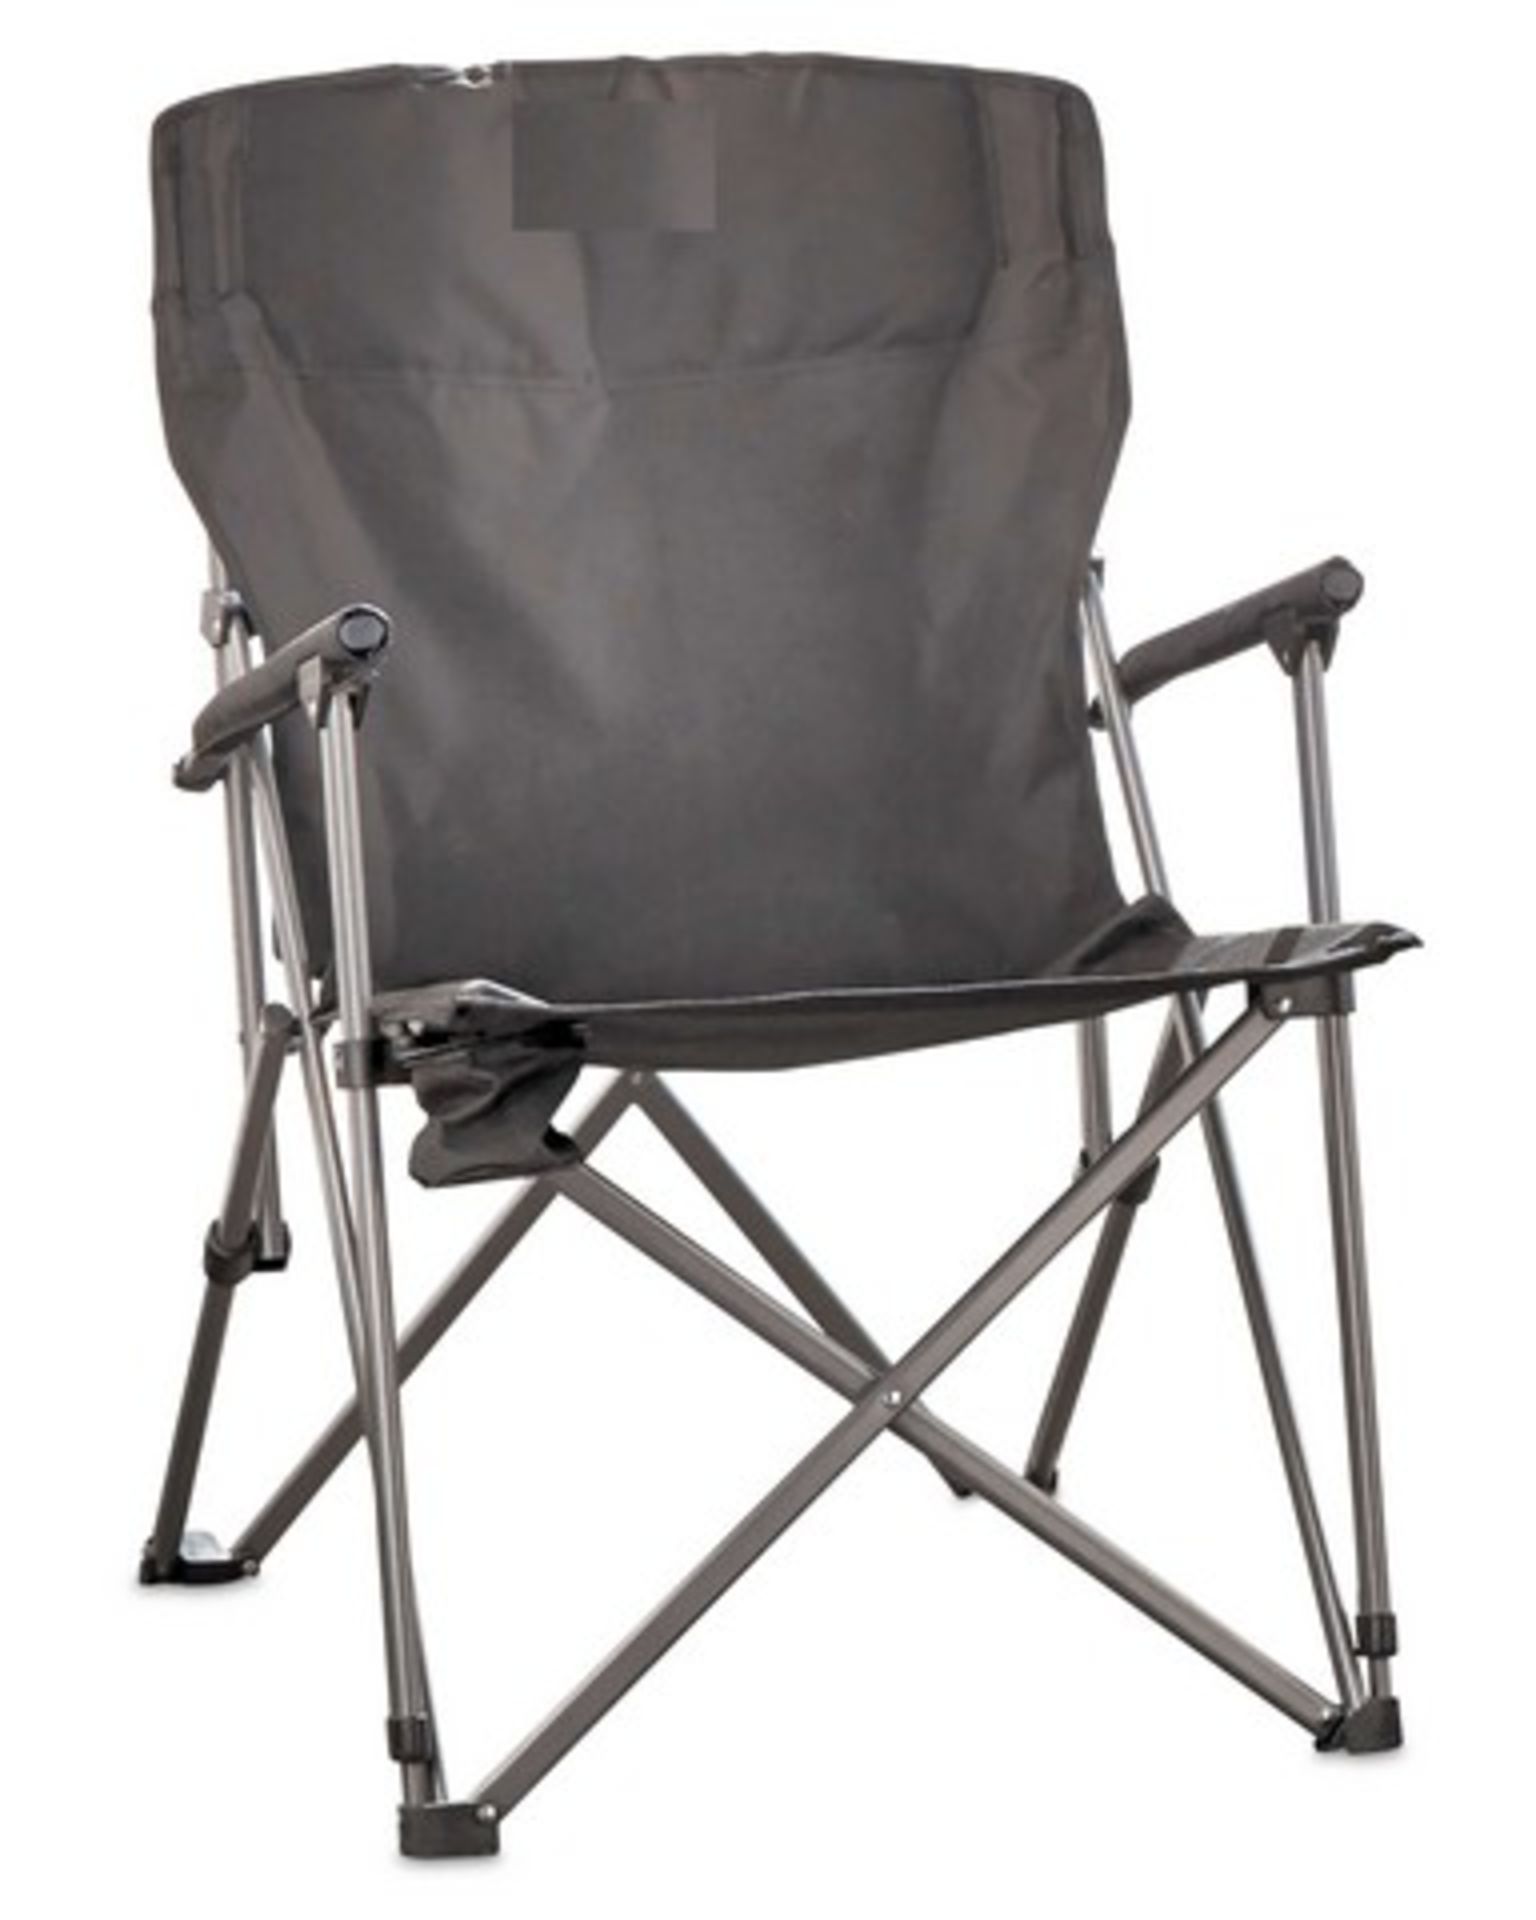 + VAT Brand New Expedition/Tourer Chair In Silver/Black With Carry Case - Lightweight Steel Frame - Image 2 of 2